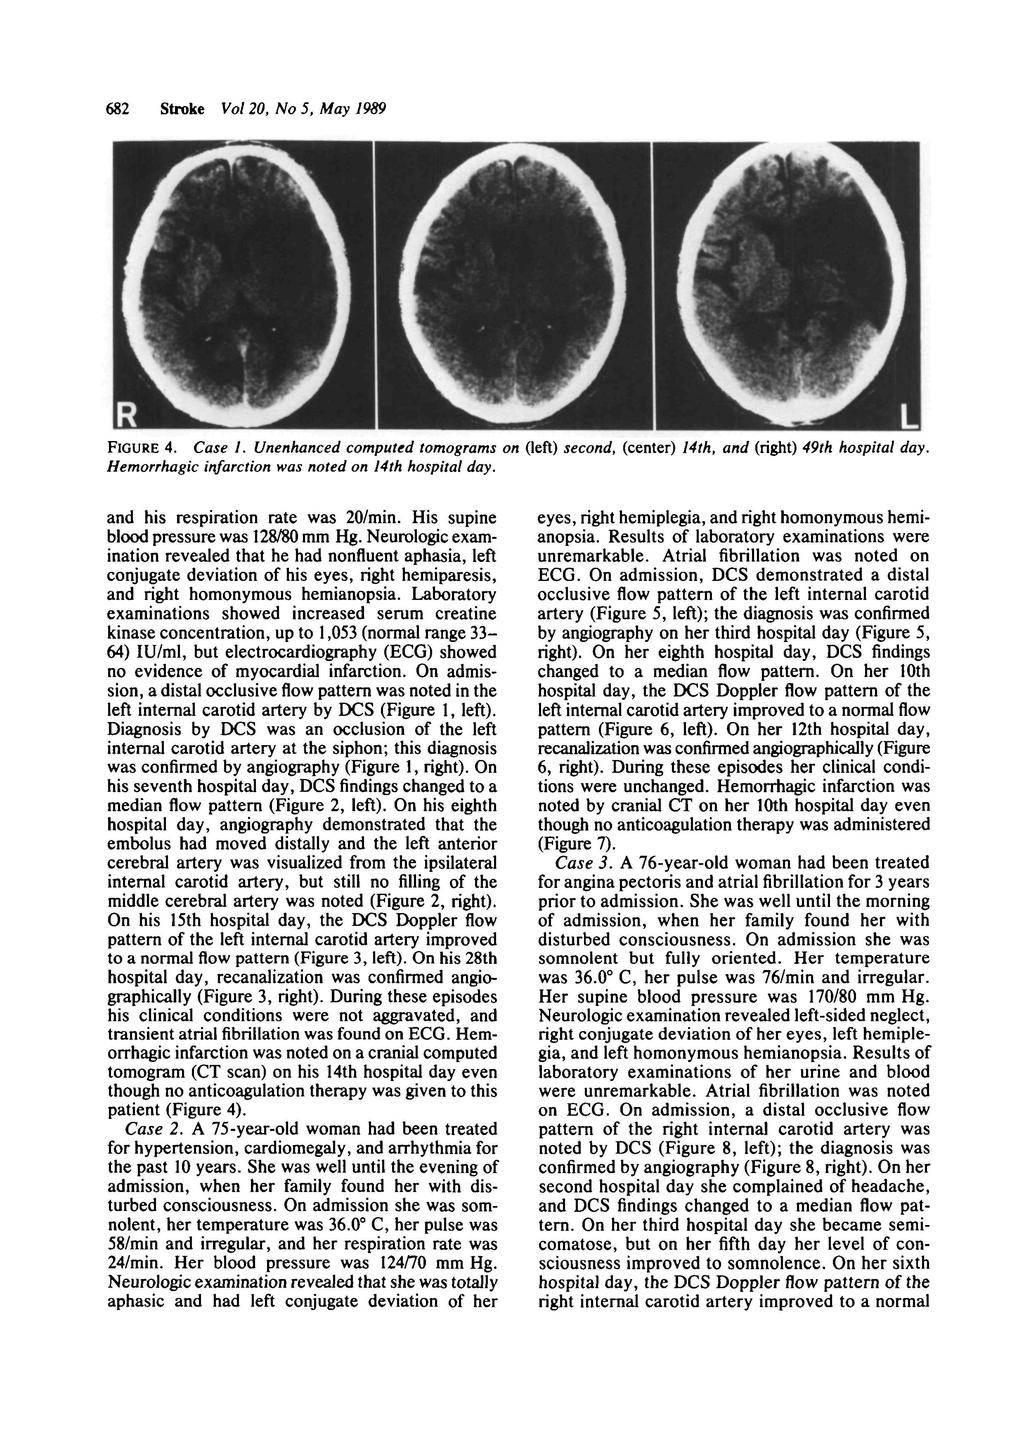 682 Stroke Vol 20, No 5, May 1989 FIGURE 4. Case 1. Unenhanced computed tomograms on Geft) second, (center) 14th, and (right) 49th hospital day. Hemorrhagic infarction was noted on 14th hospital day.